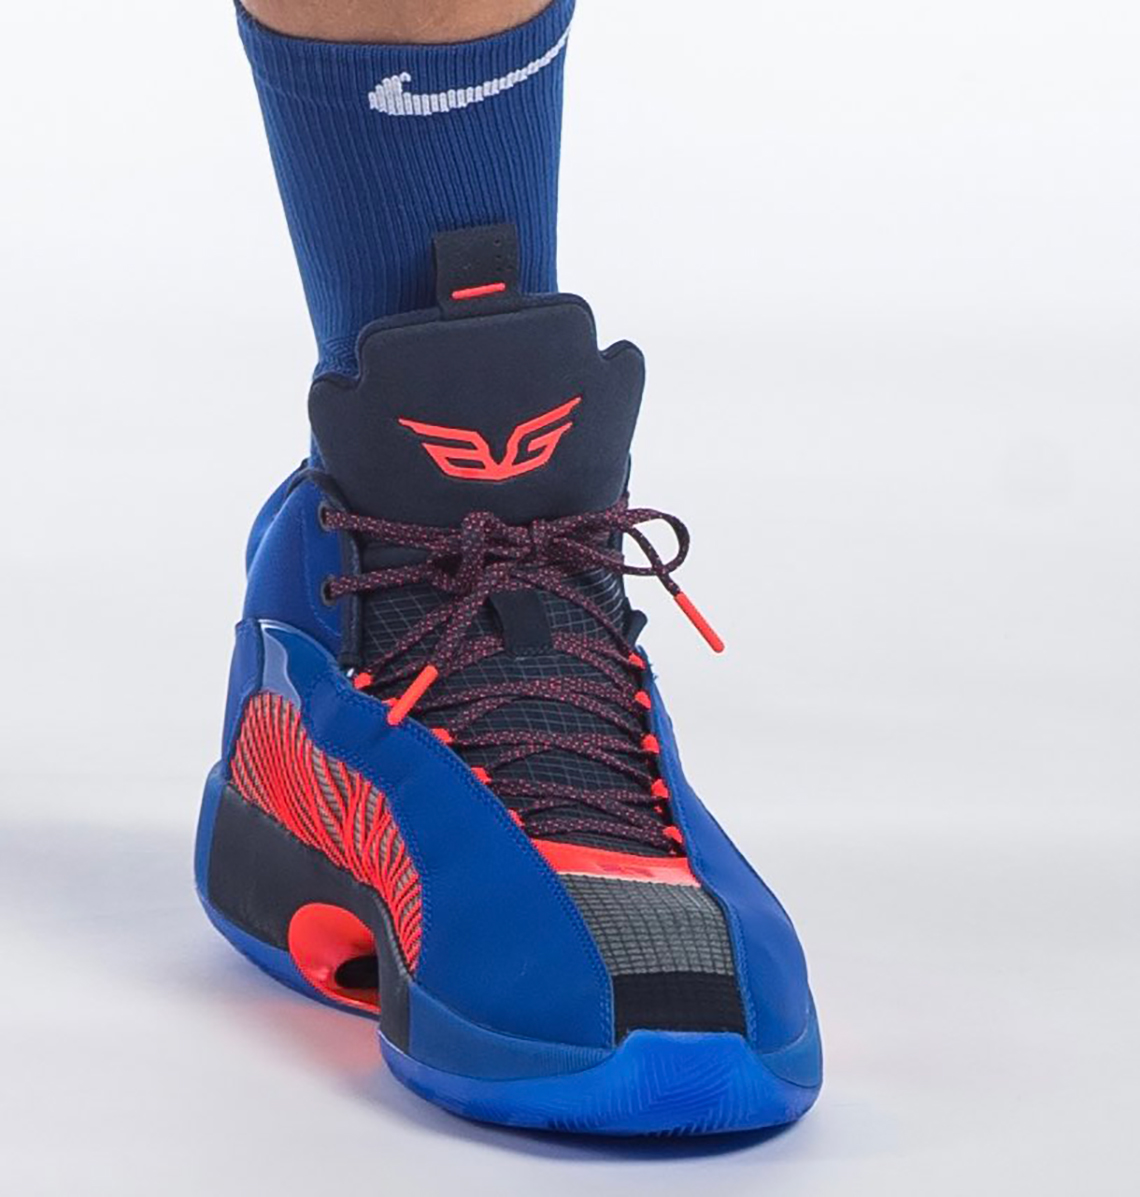 Buy > blake griffin signature shoe > in stock